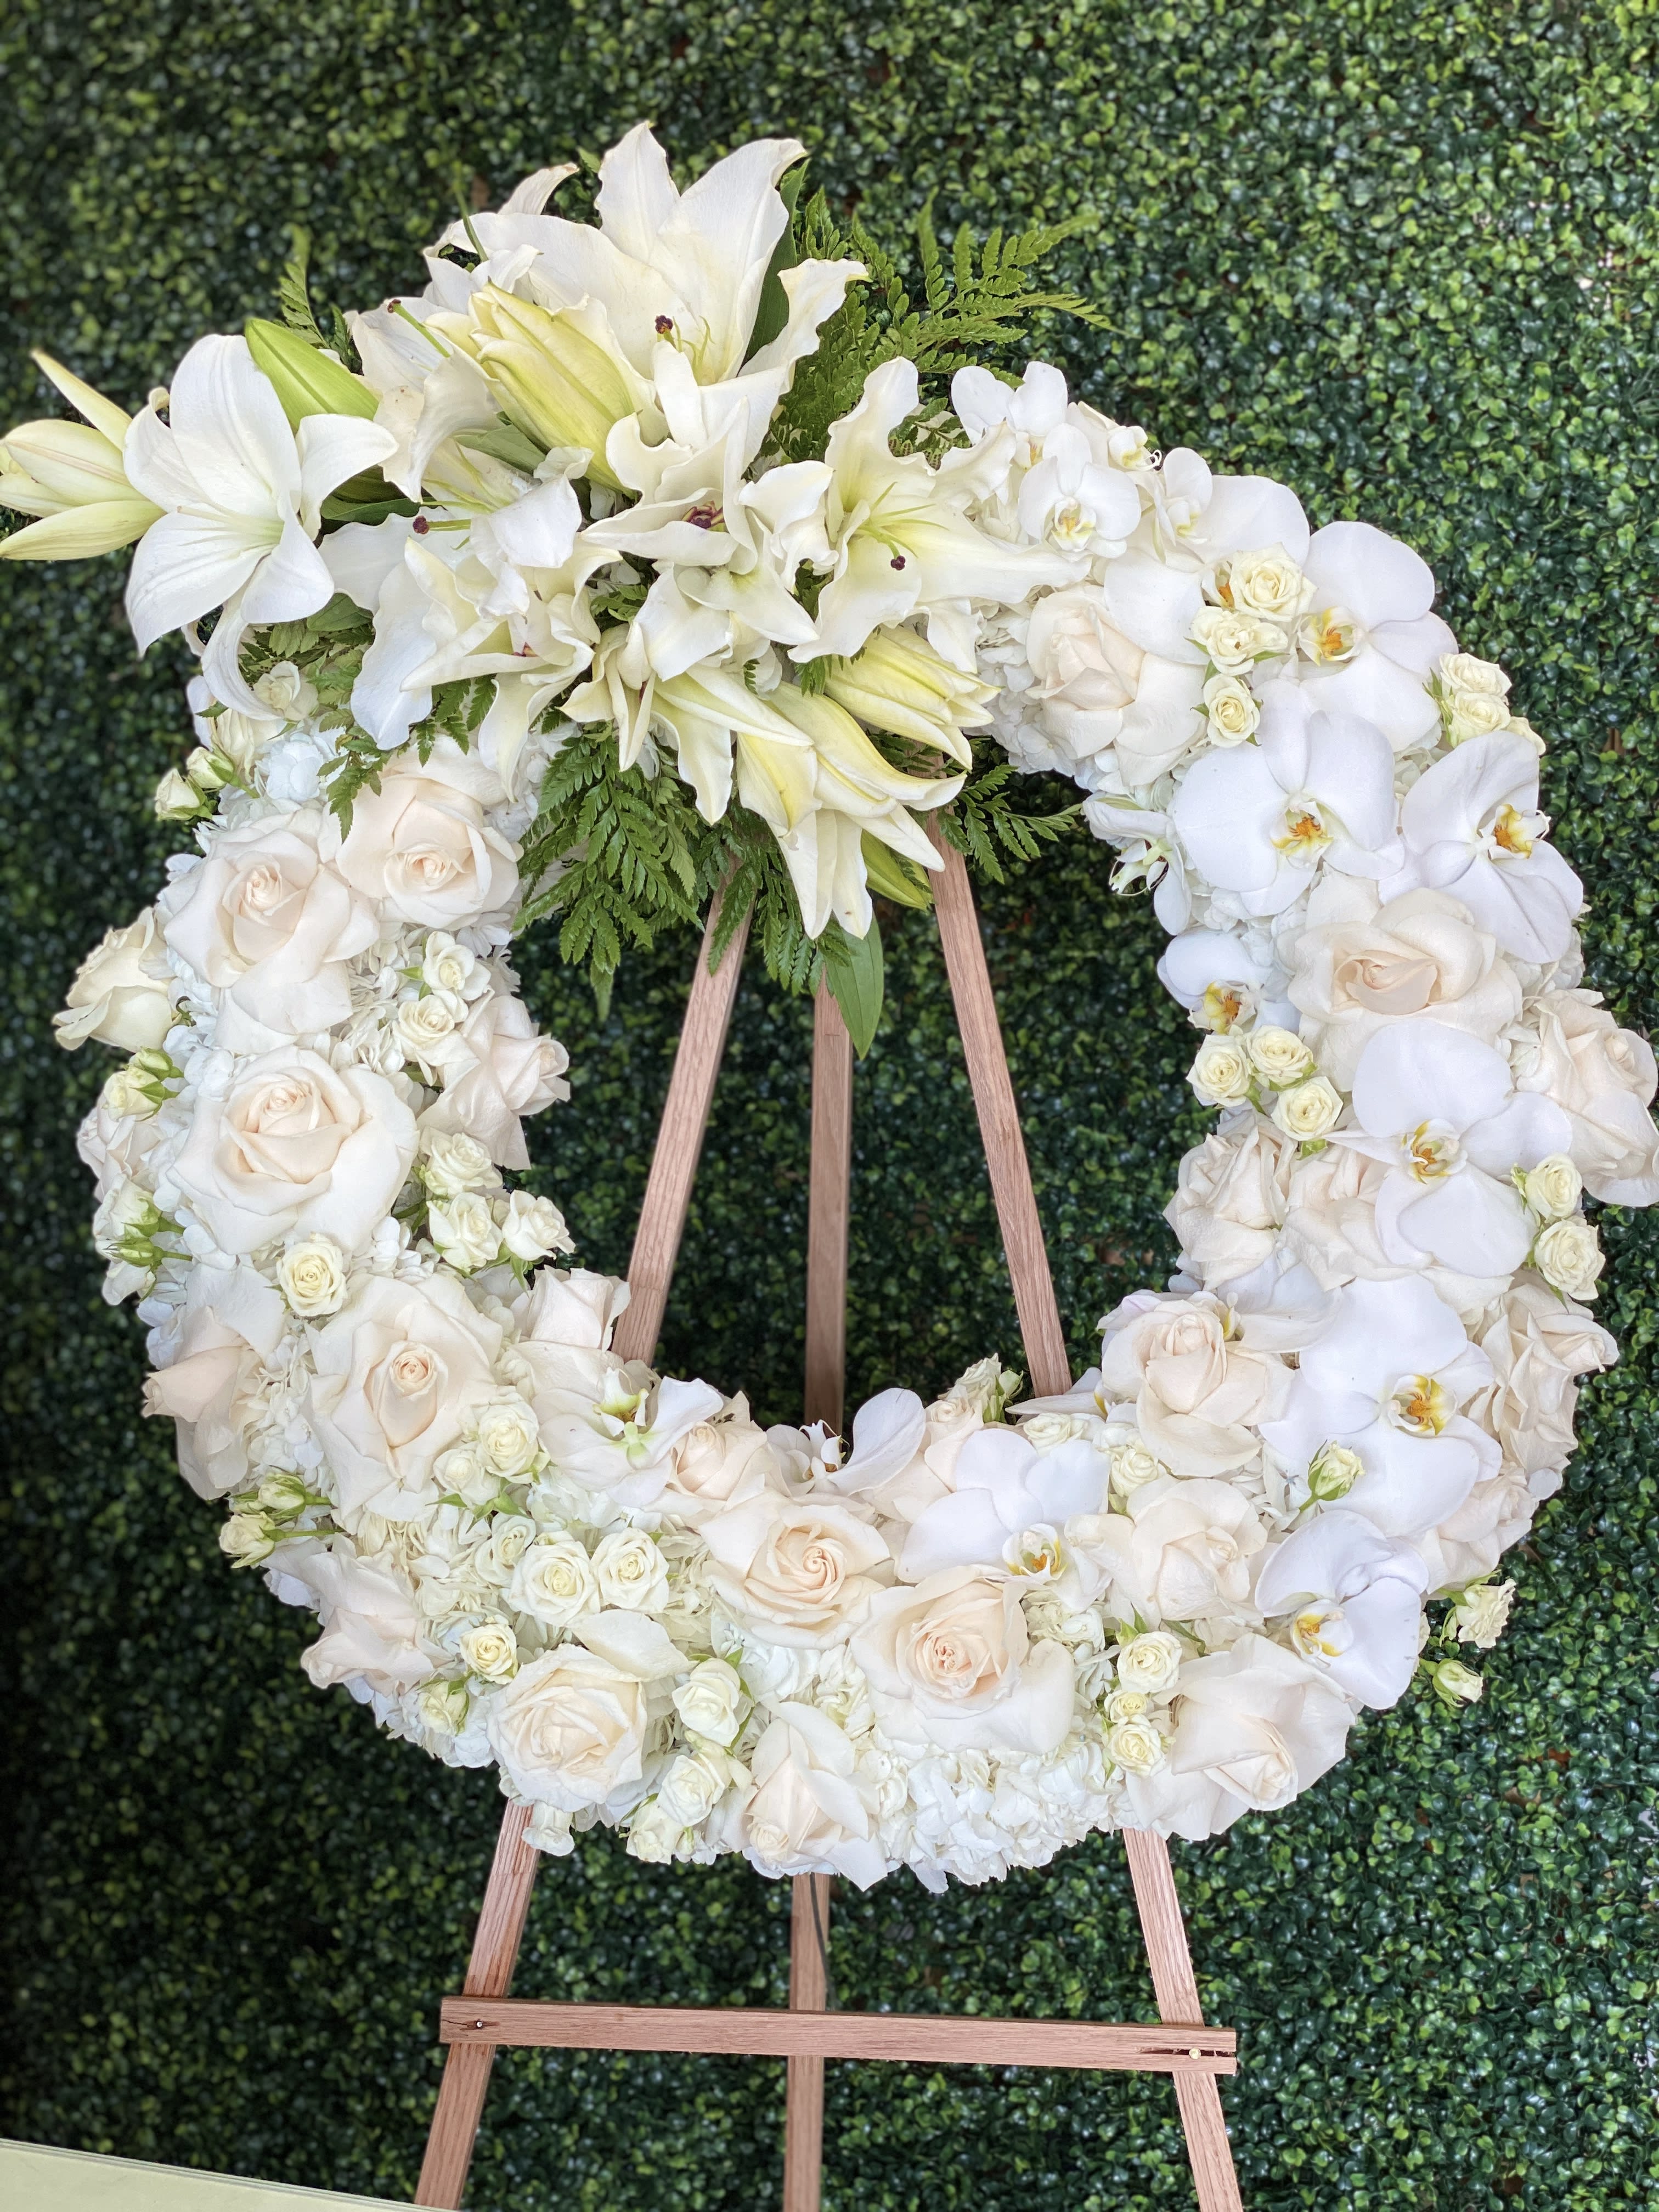 Endless Remembrance - White Floral Easel Wreath - Roses and orchids - This grand wreath is composed of an abundance of Roses, Hydrangeas and Phalaenopsis Orchids with a Casablanca floral accent.  